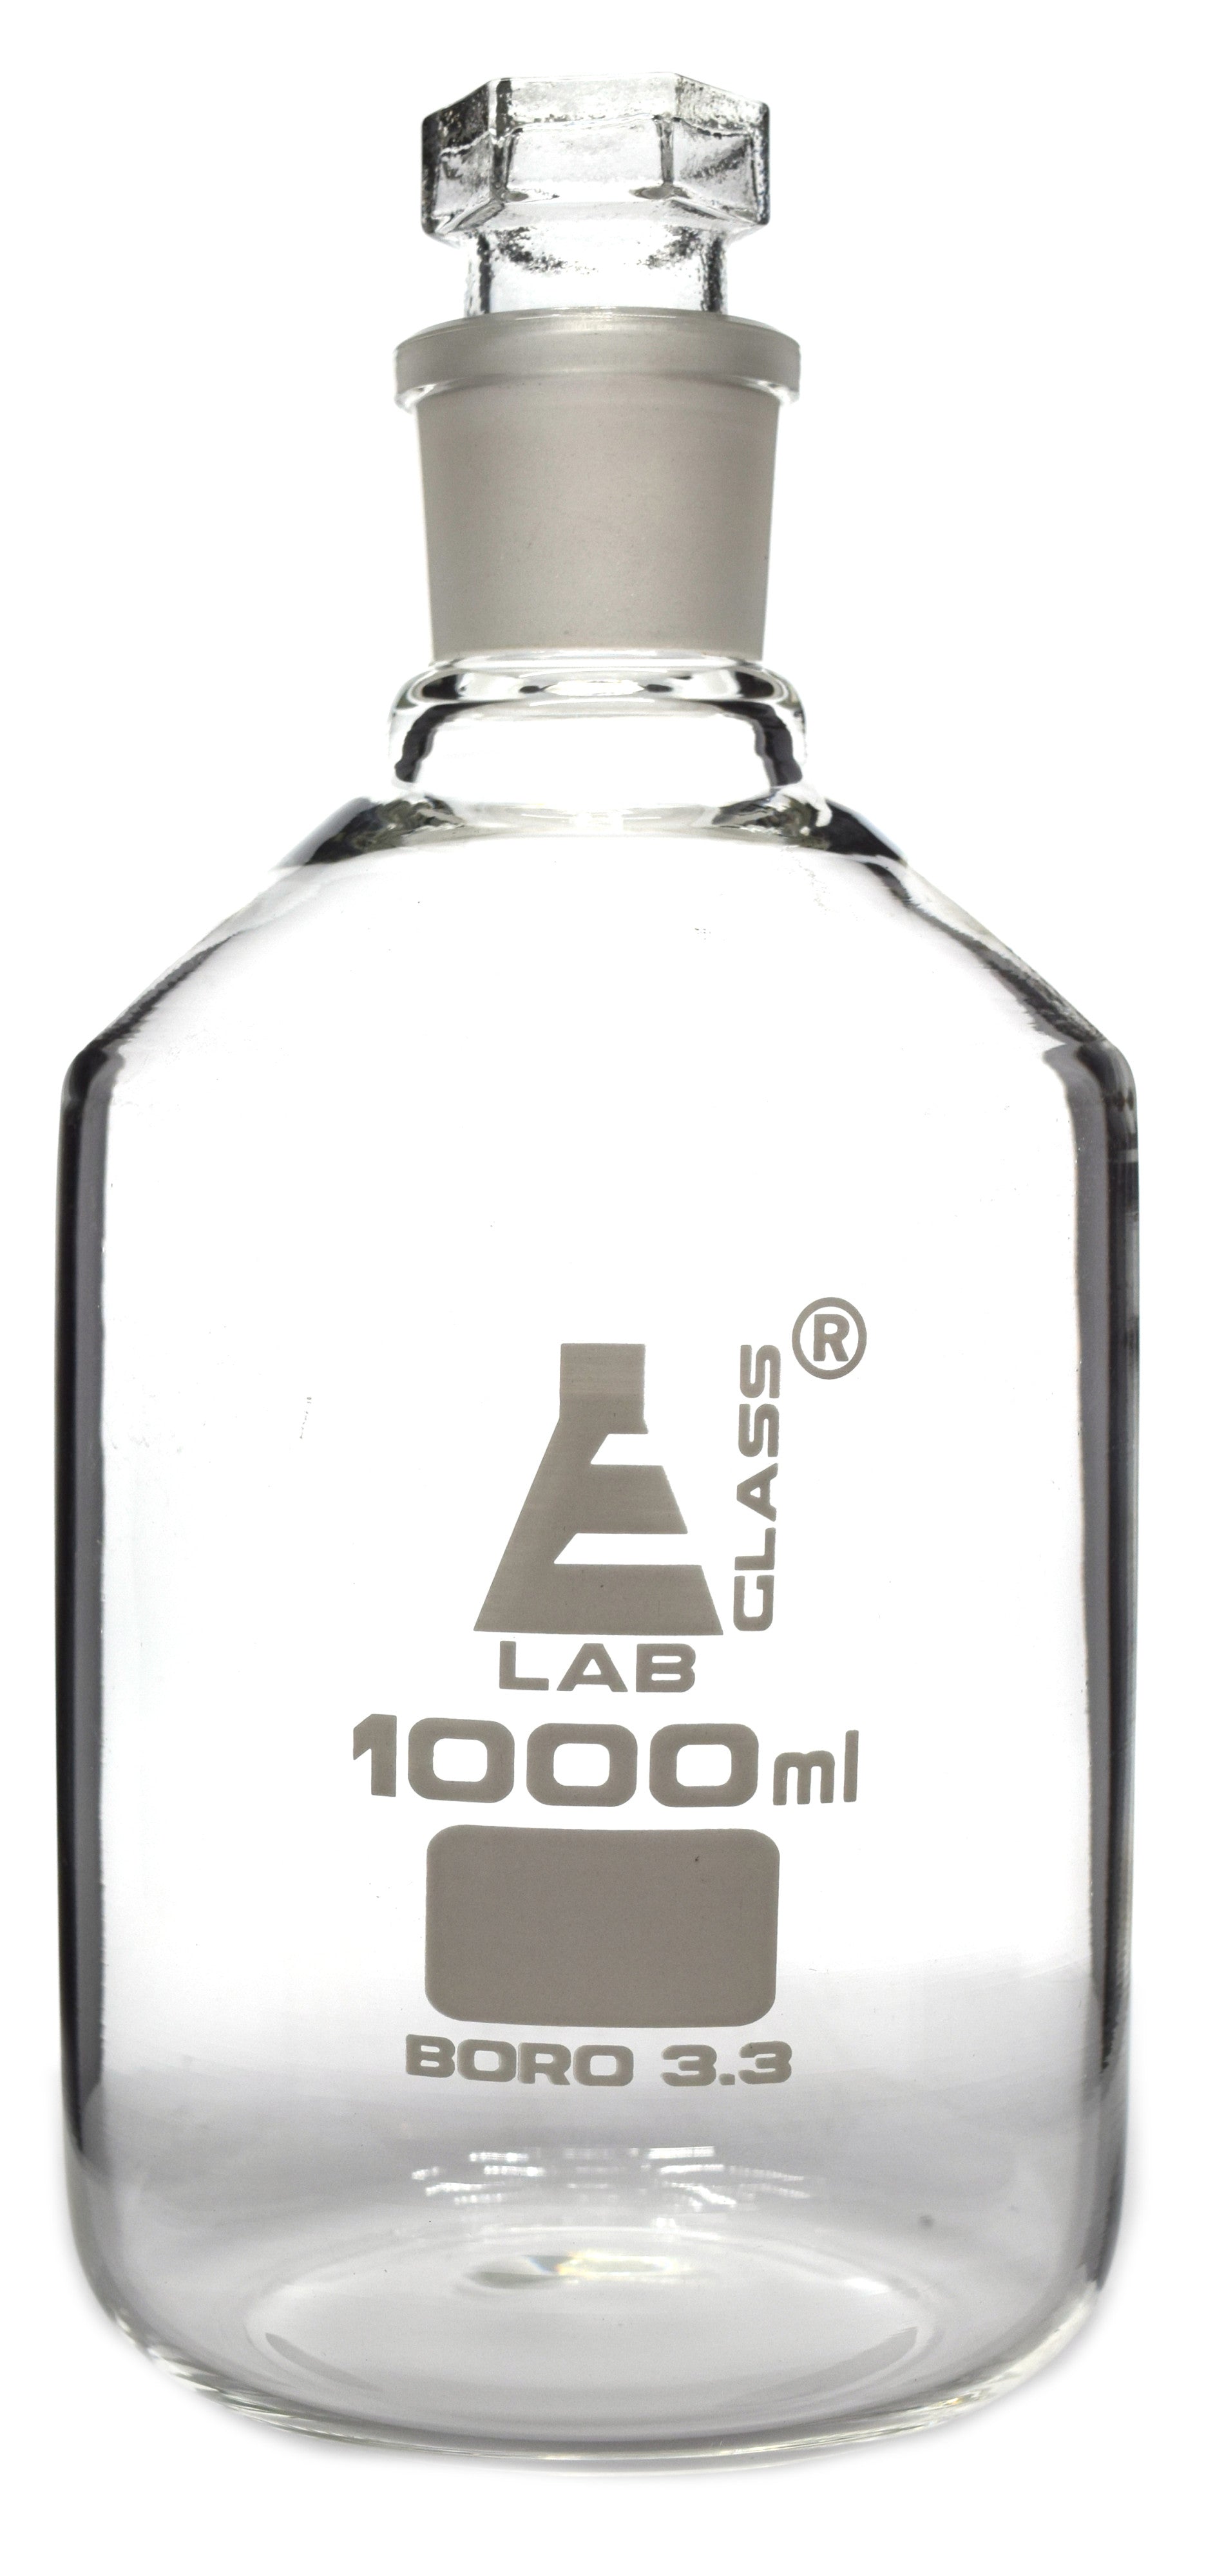 Clear Borosilicate Glass Reagent Bottle with Hollow Glass Stopper, 1000 ml (1 L), Narrow Mouth, Autoclavable